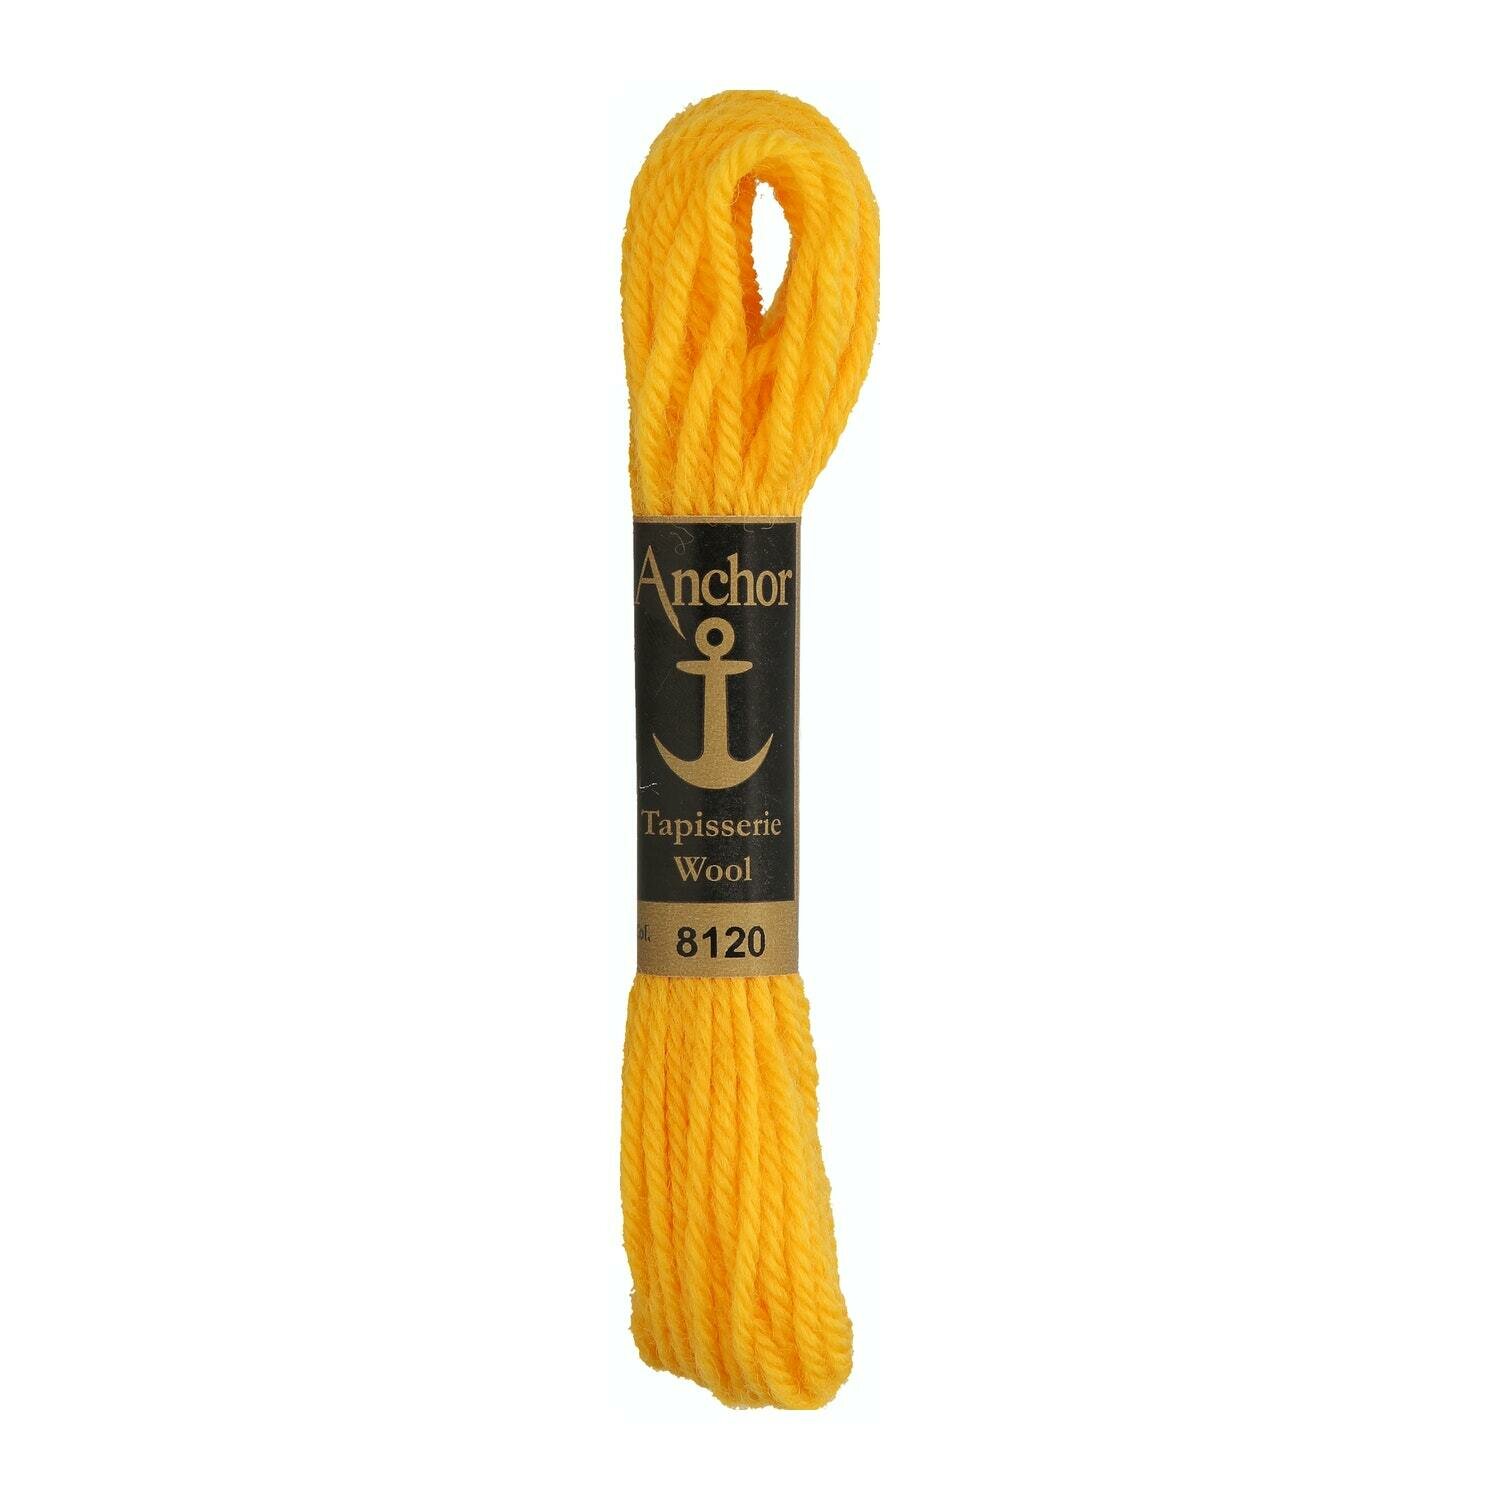 Anchor Tapisserie Wool #  08120